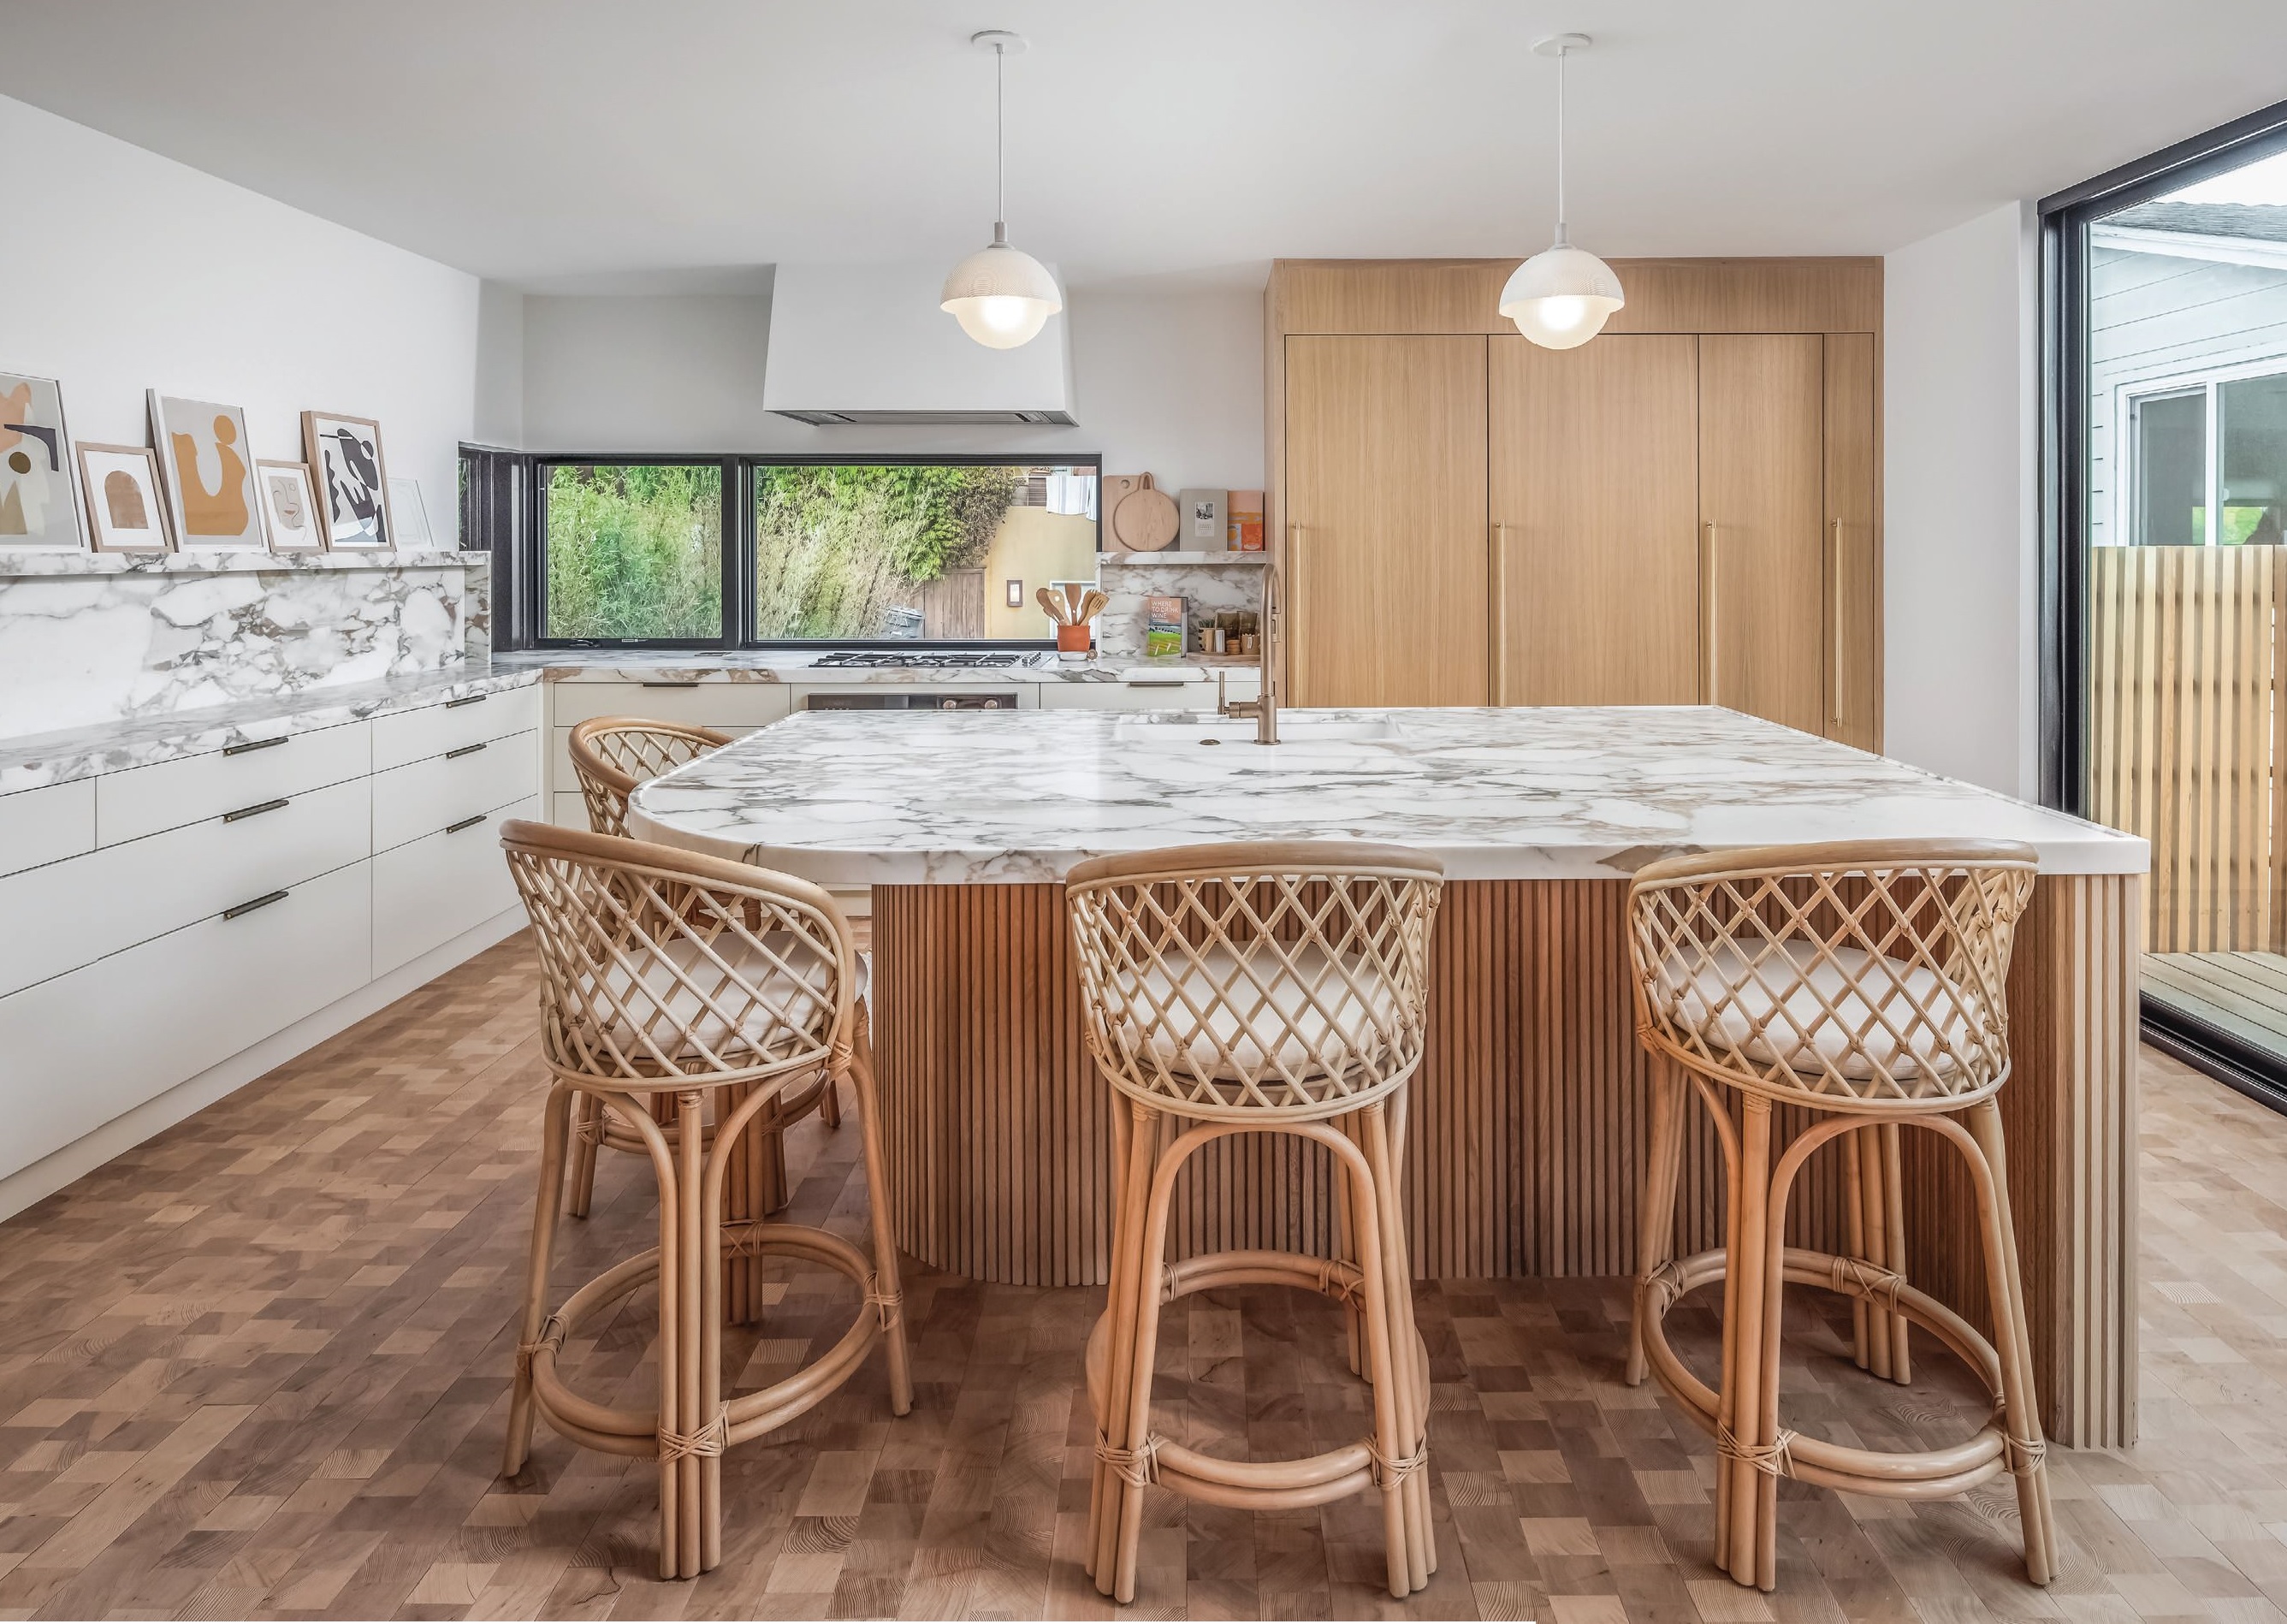 Hemlock flooring and birch cabinetry give the modern kitchen a soft edge. PHOTO BY SAM CHEN/ALOHA PHOTOGRAPHY